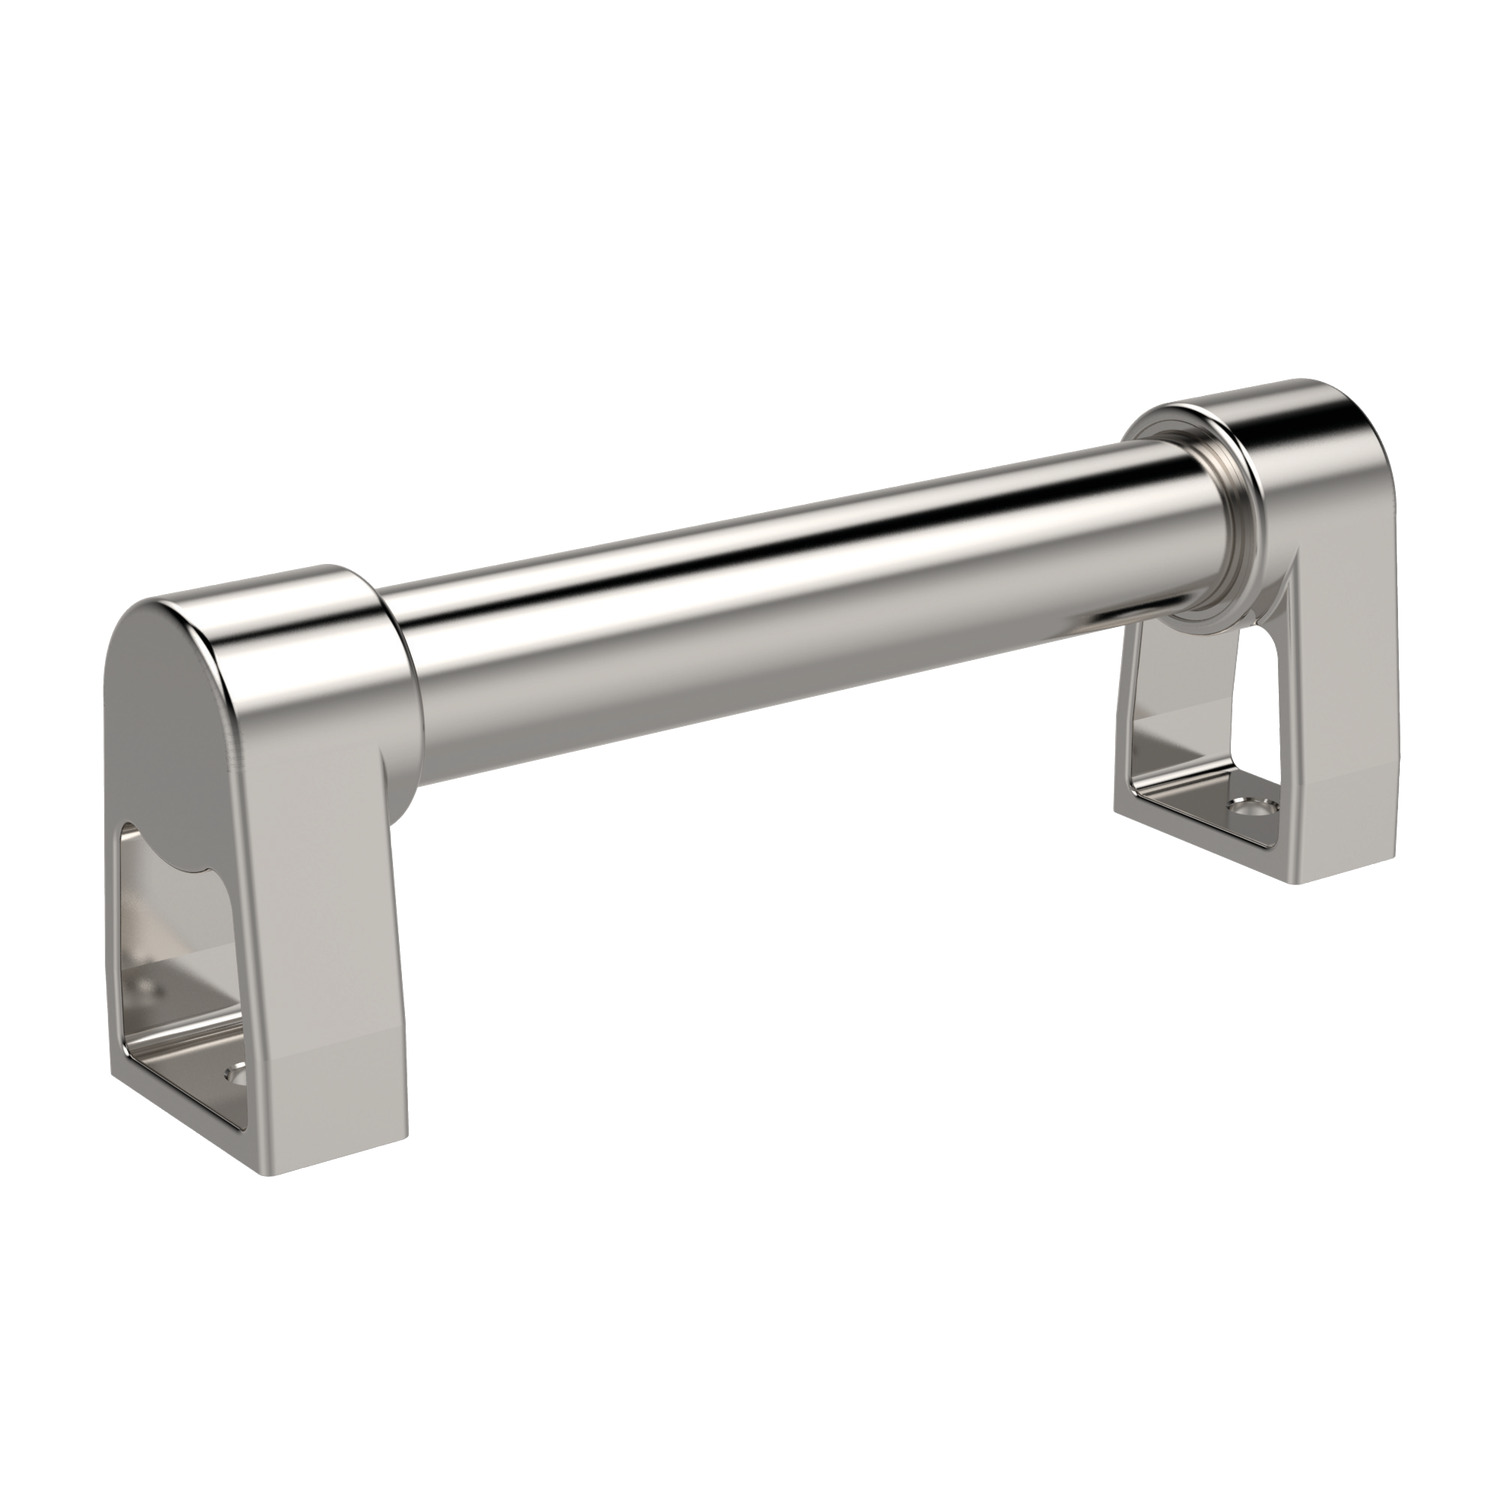 Pull Handles Stainless steel pull handles for front/rear mounting